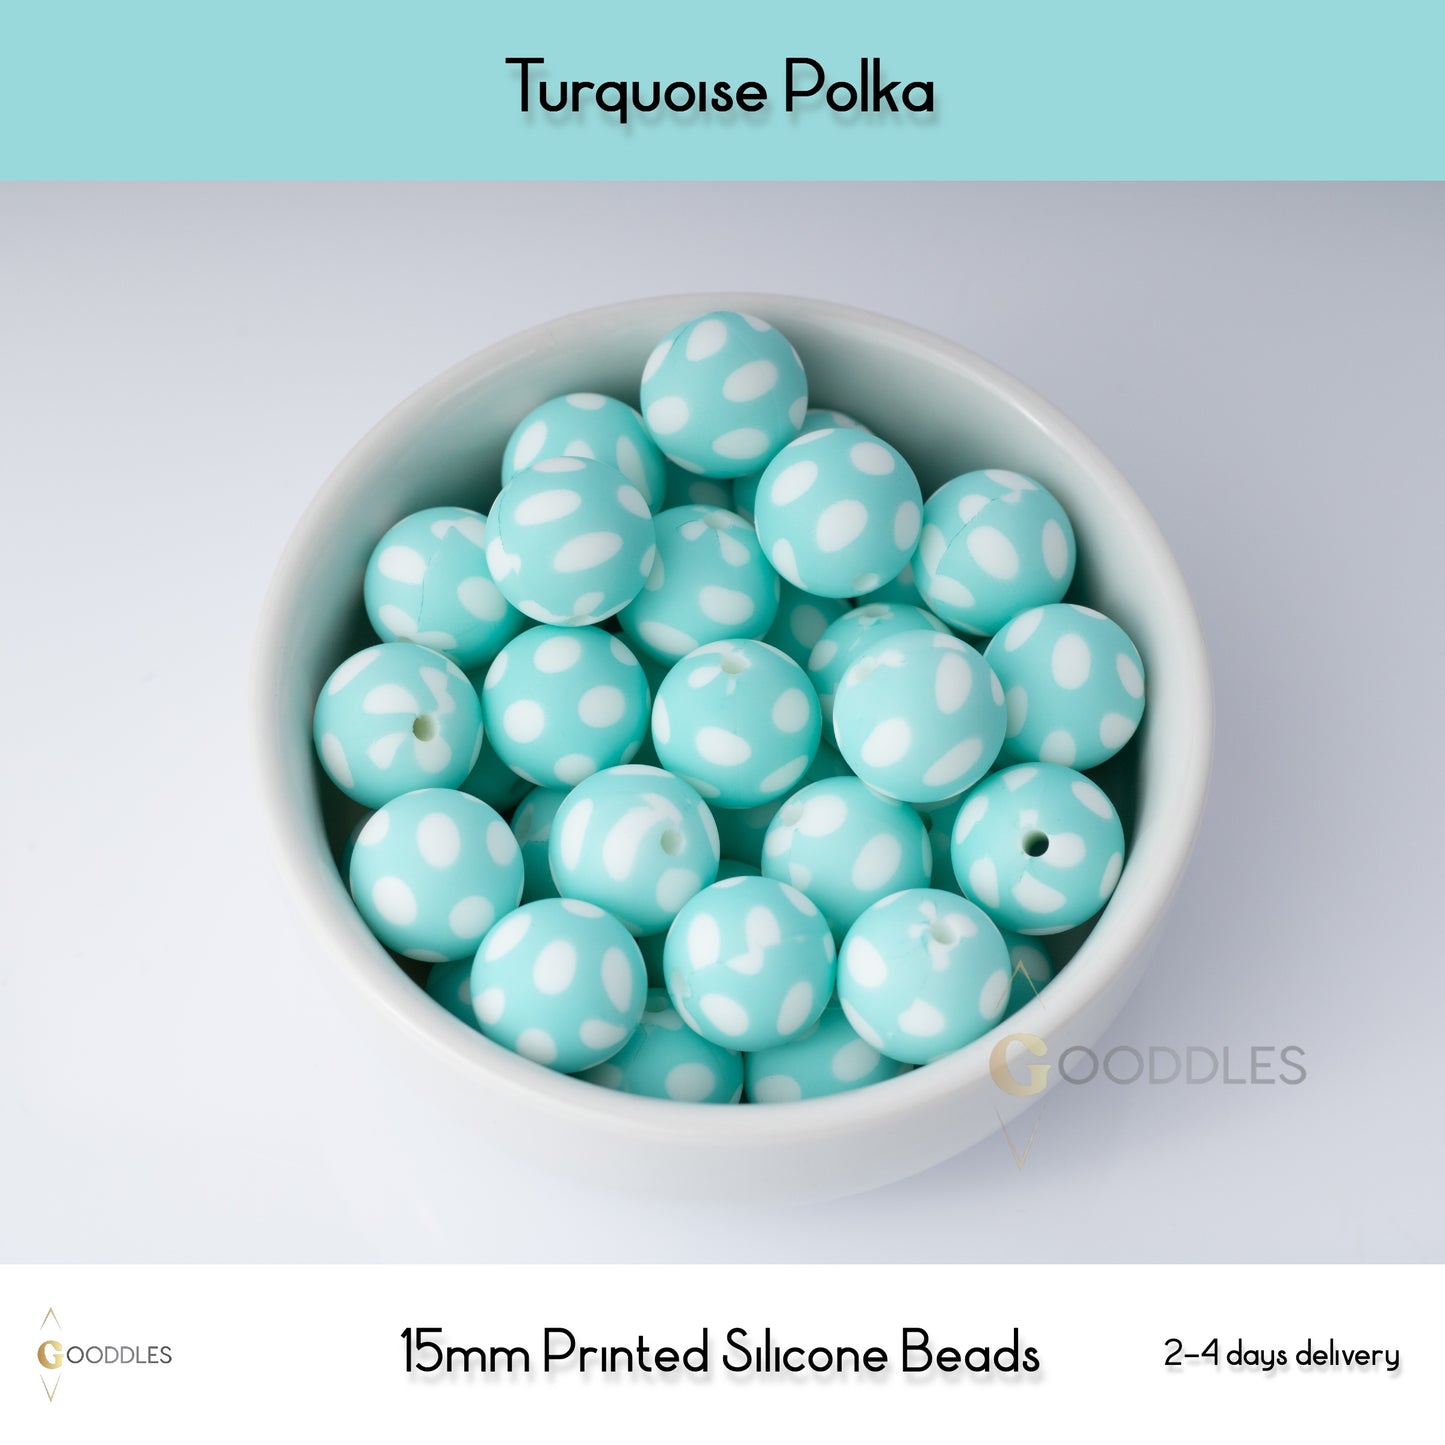 5pcs, Turquoise Polka Silicone Beads Printed Round Silicone Beads